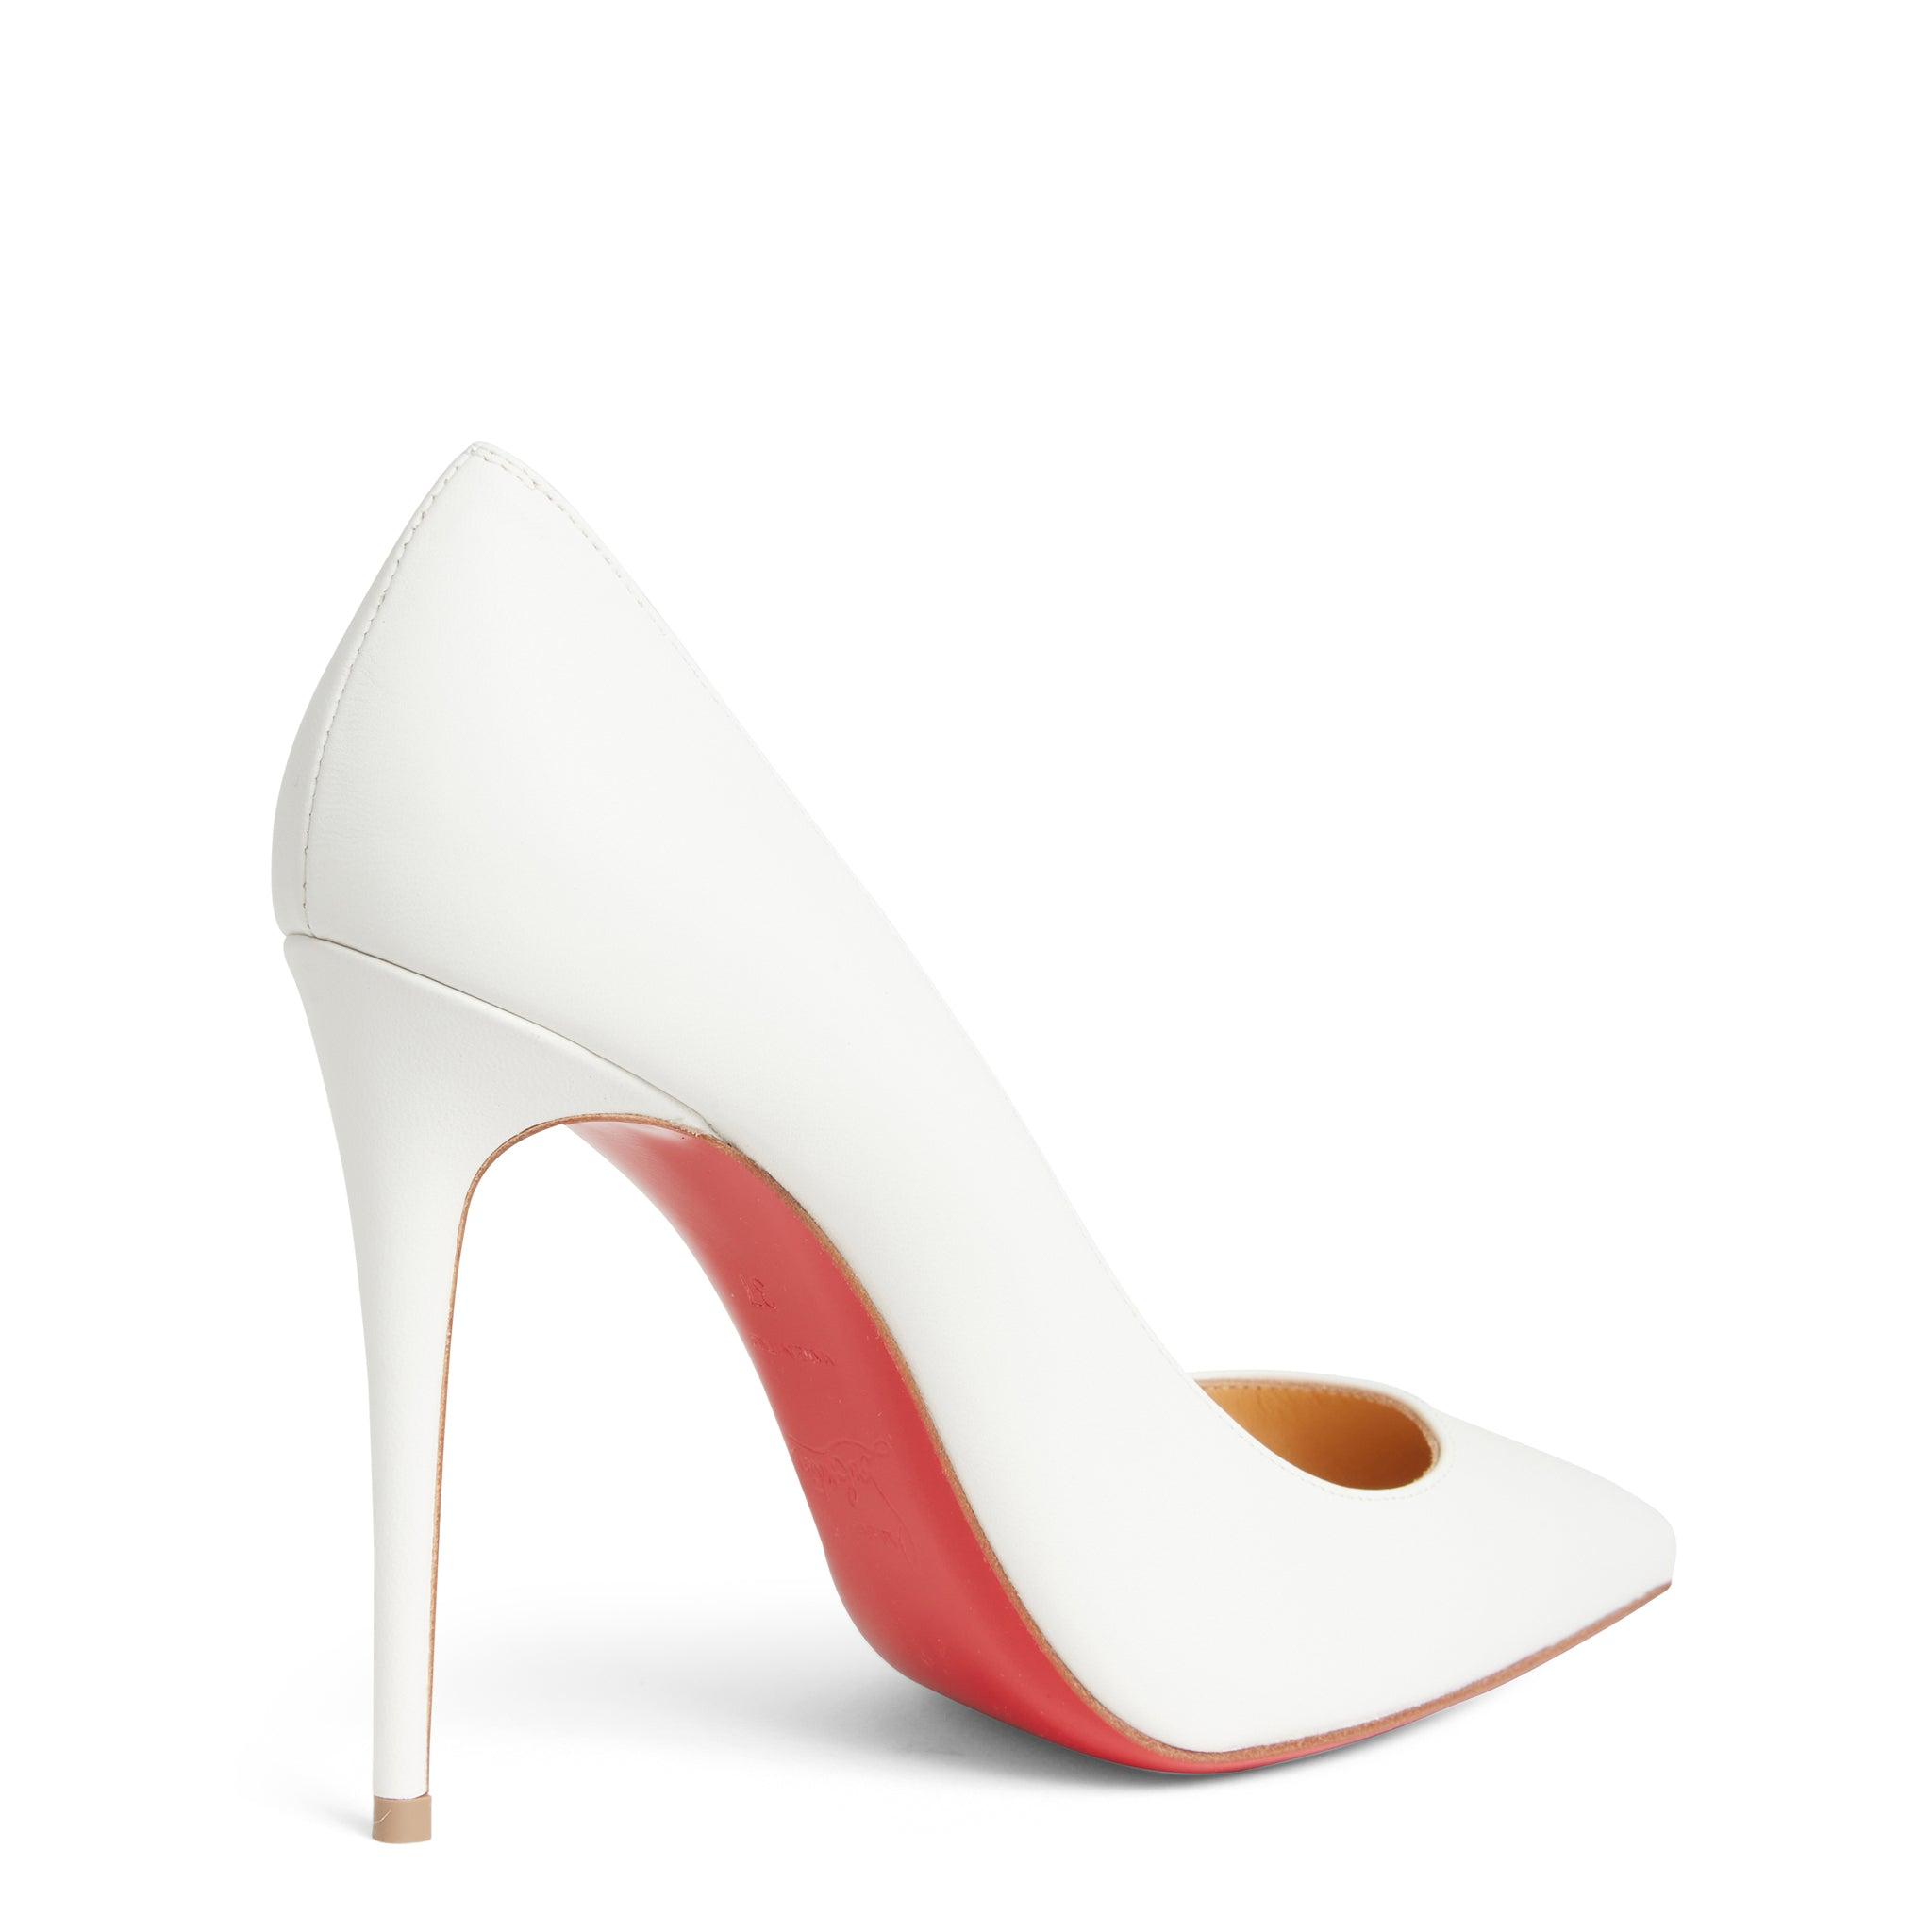 Get Upto 80% OFF on Heels for Girls & Women - Snapdeal